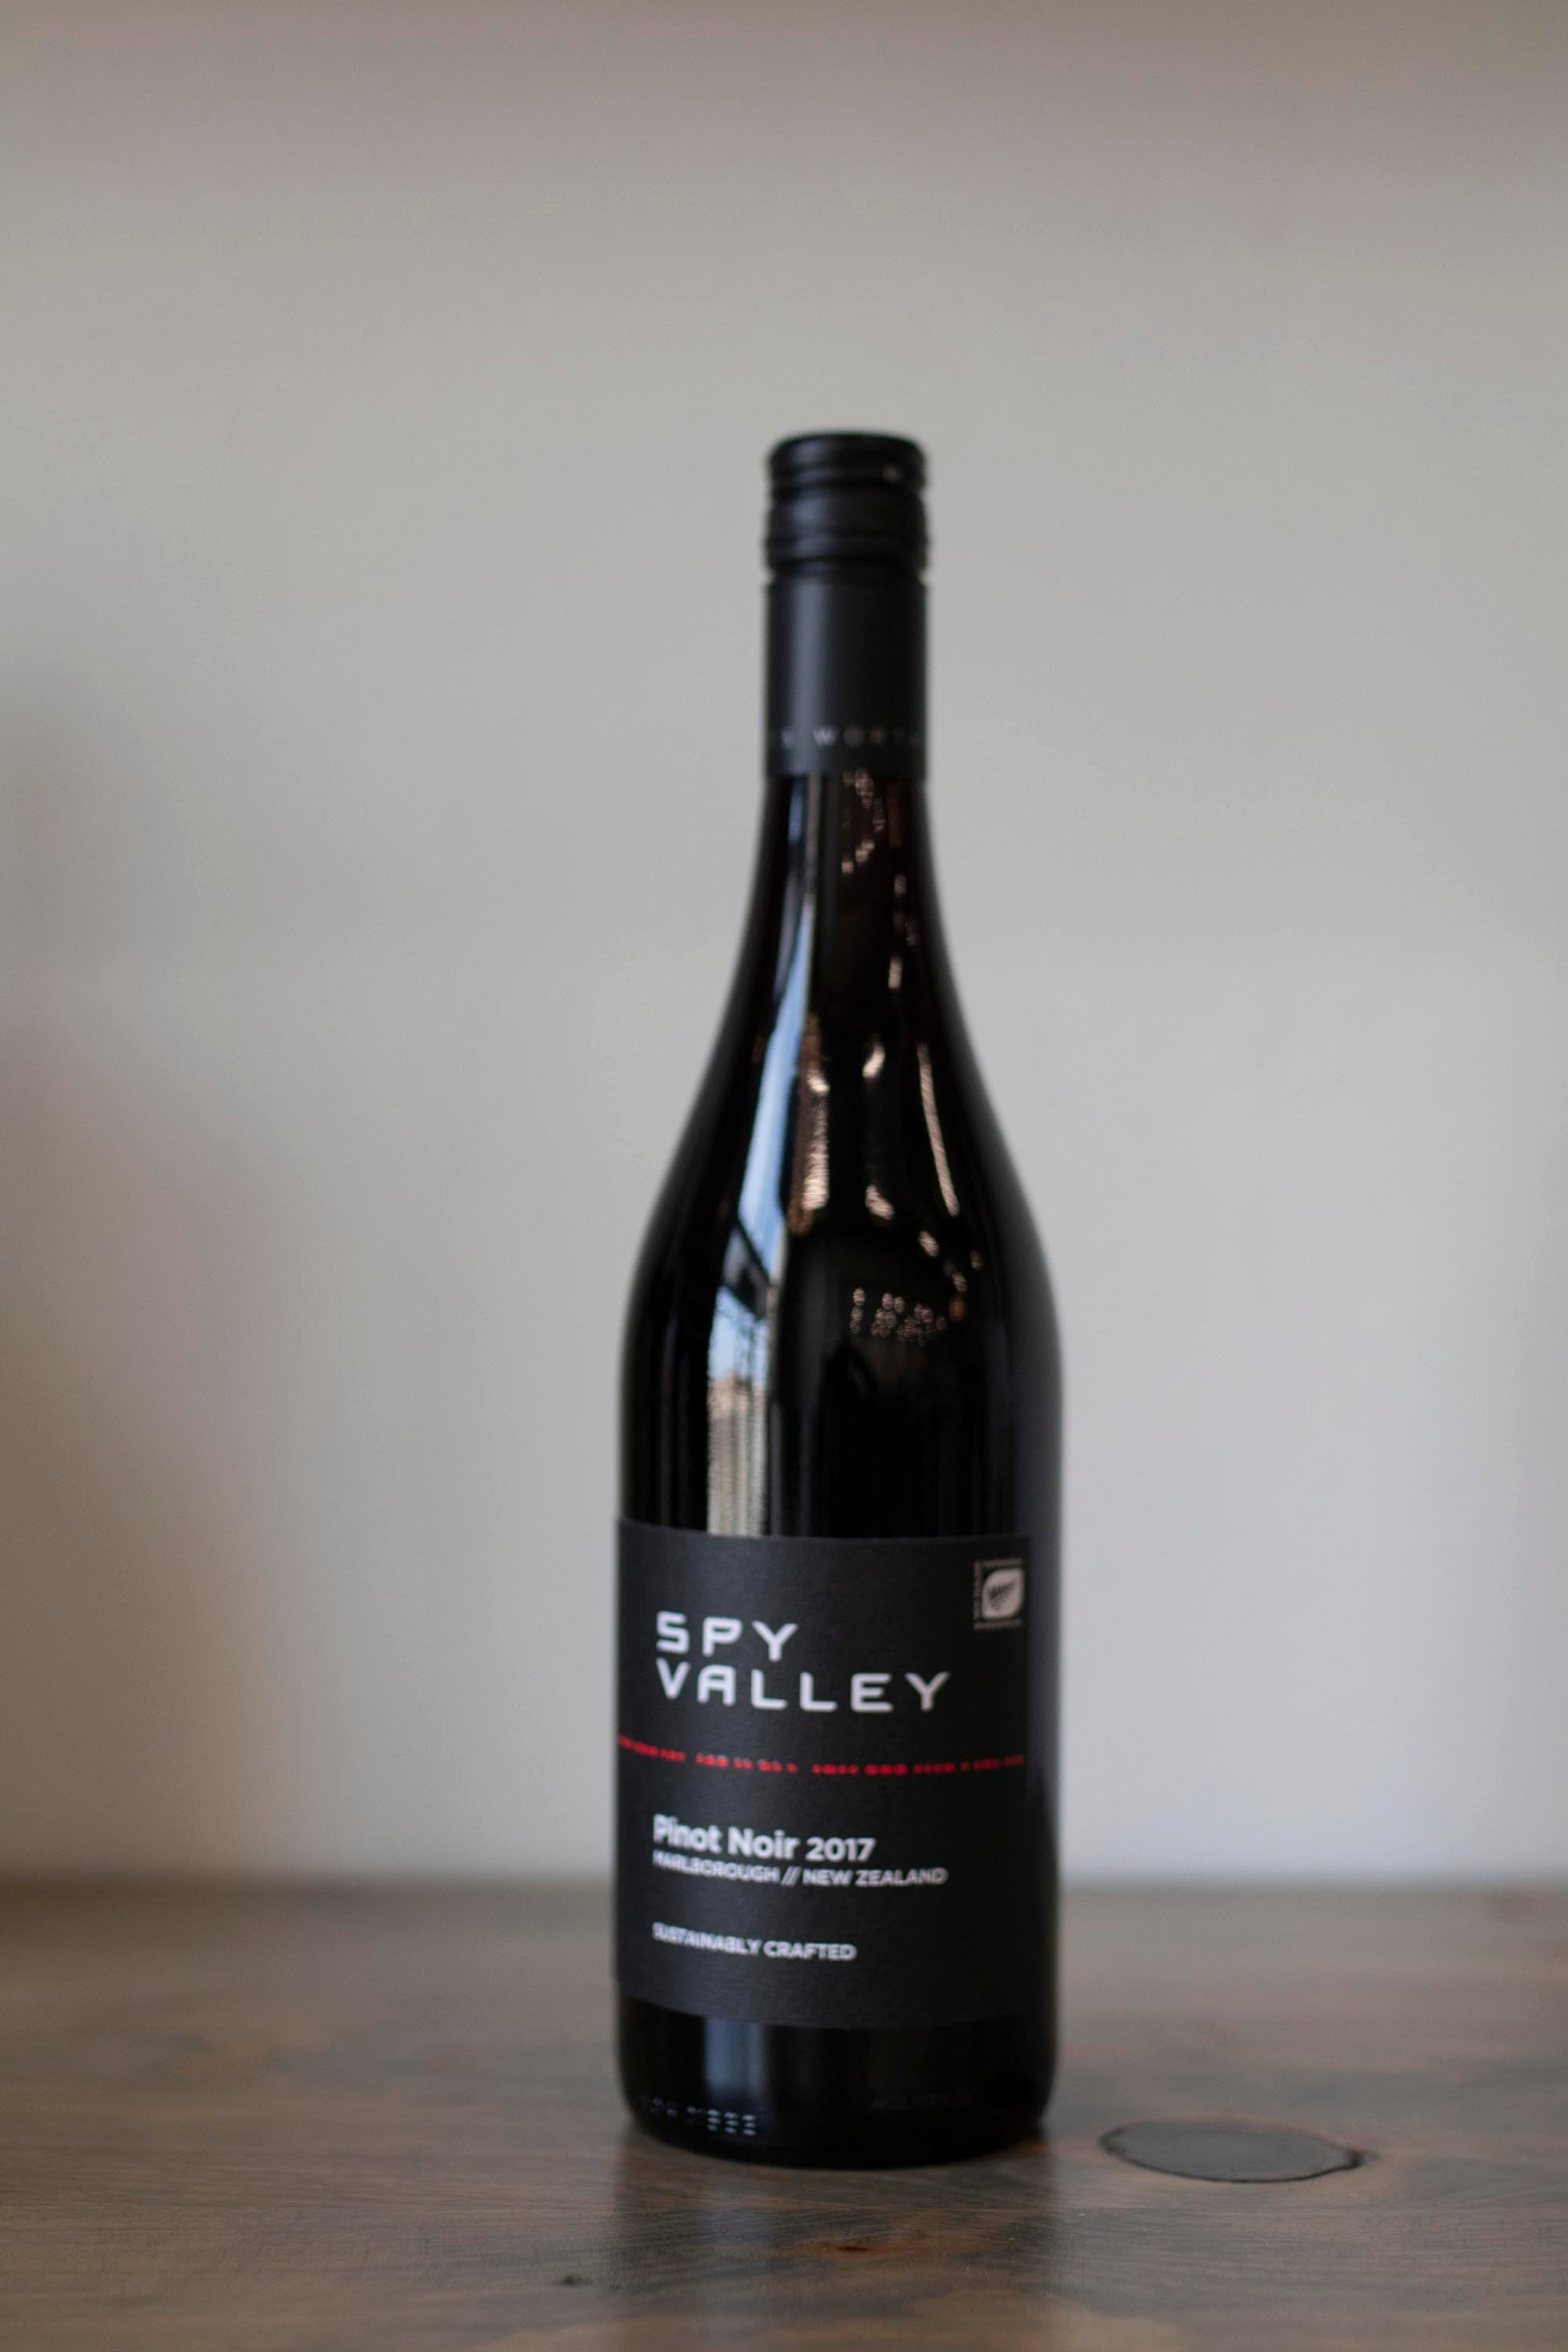 Bottle of Spy valley Pinot noir found at Vine & Board in 3809 NW 166th St Suite 1, Edmond, OK 73012